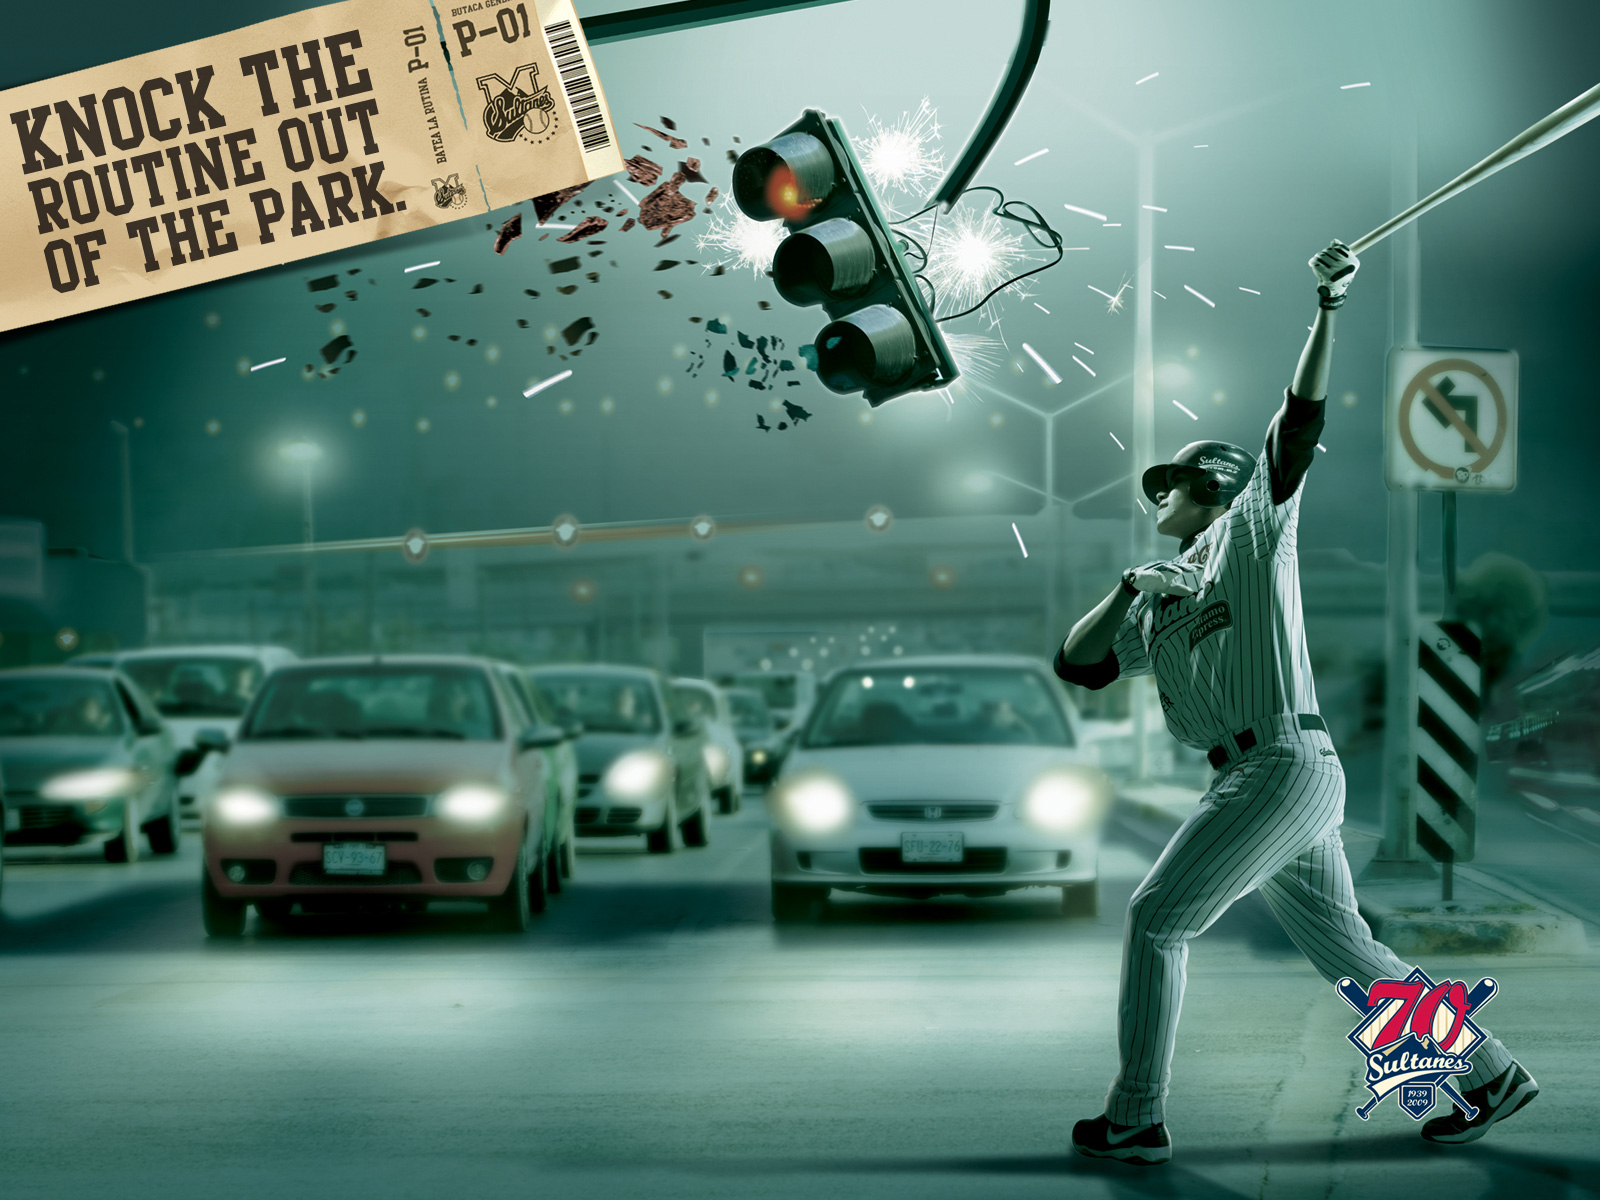 Sultanes: Knock the Routine out of the Park, Traffic, Knock the Rou •  Ads of the World™